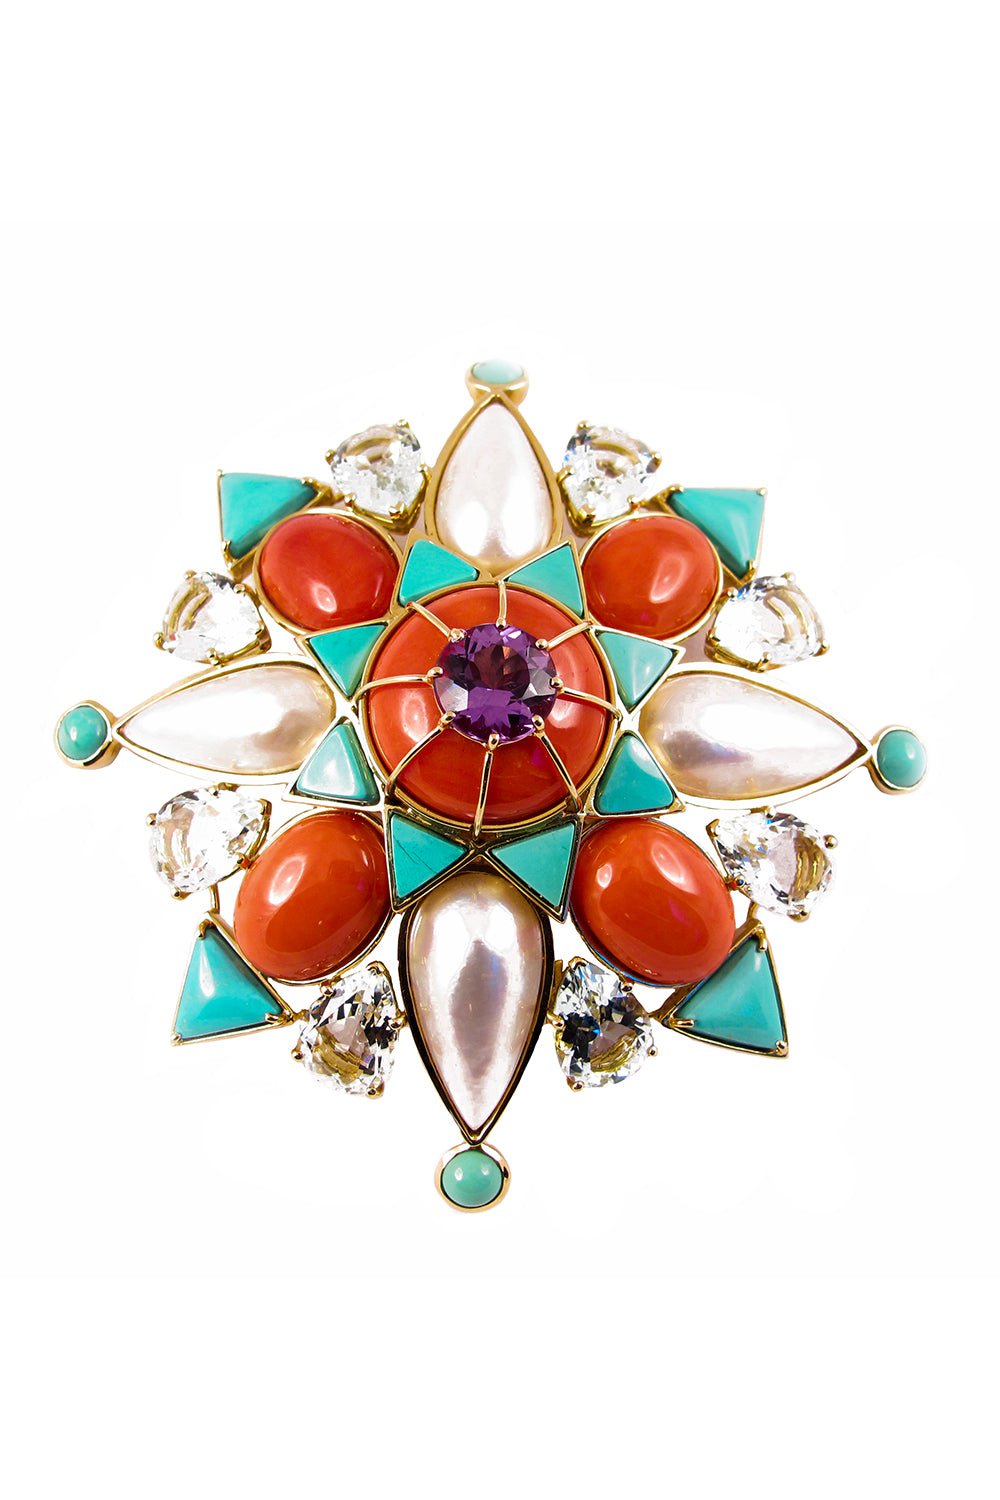 TONY DUQUETTE-Coral Turquoise Brooch-YELLOW GOLD